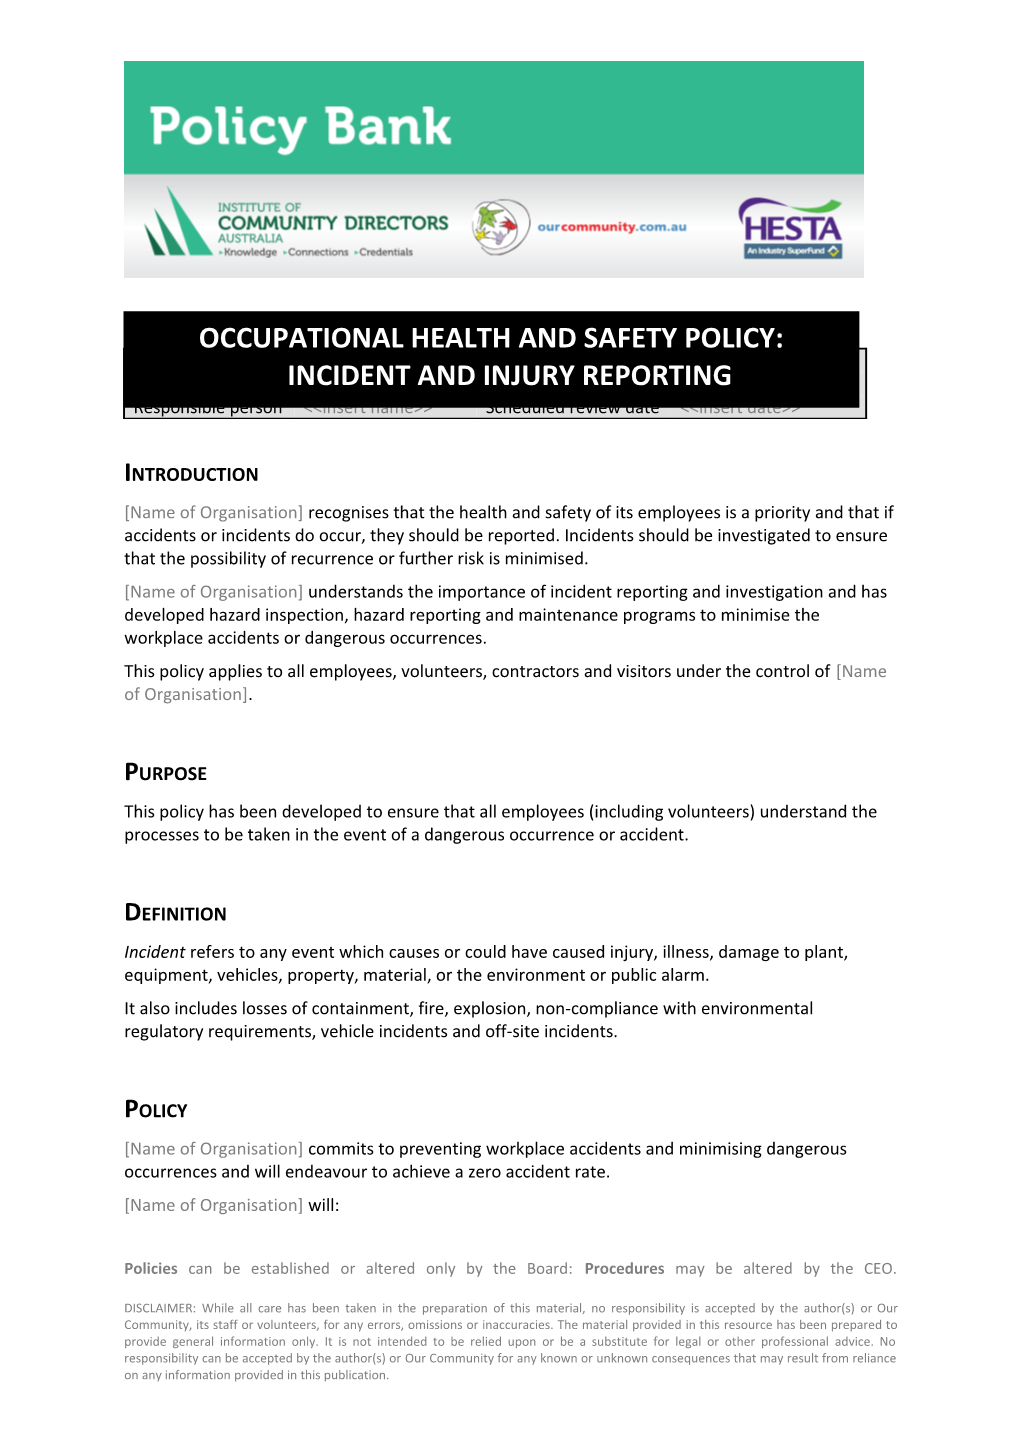 Name of Organisation Recognises That the Health and Safety of Its Employees Is a Priority